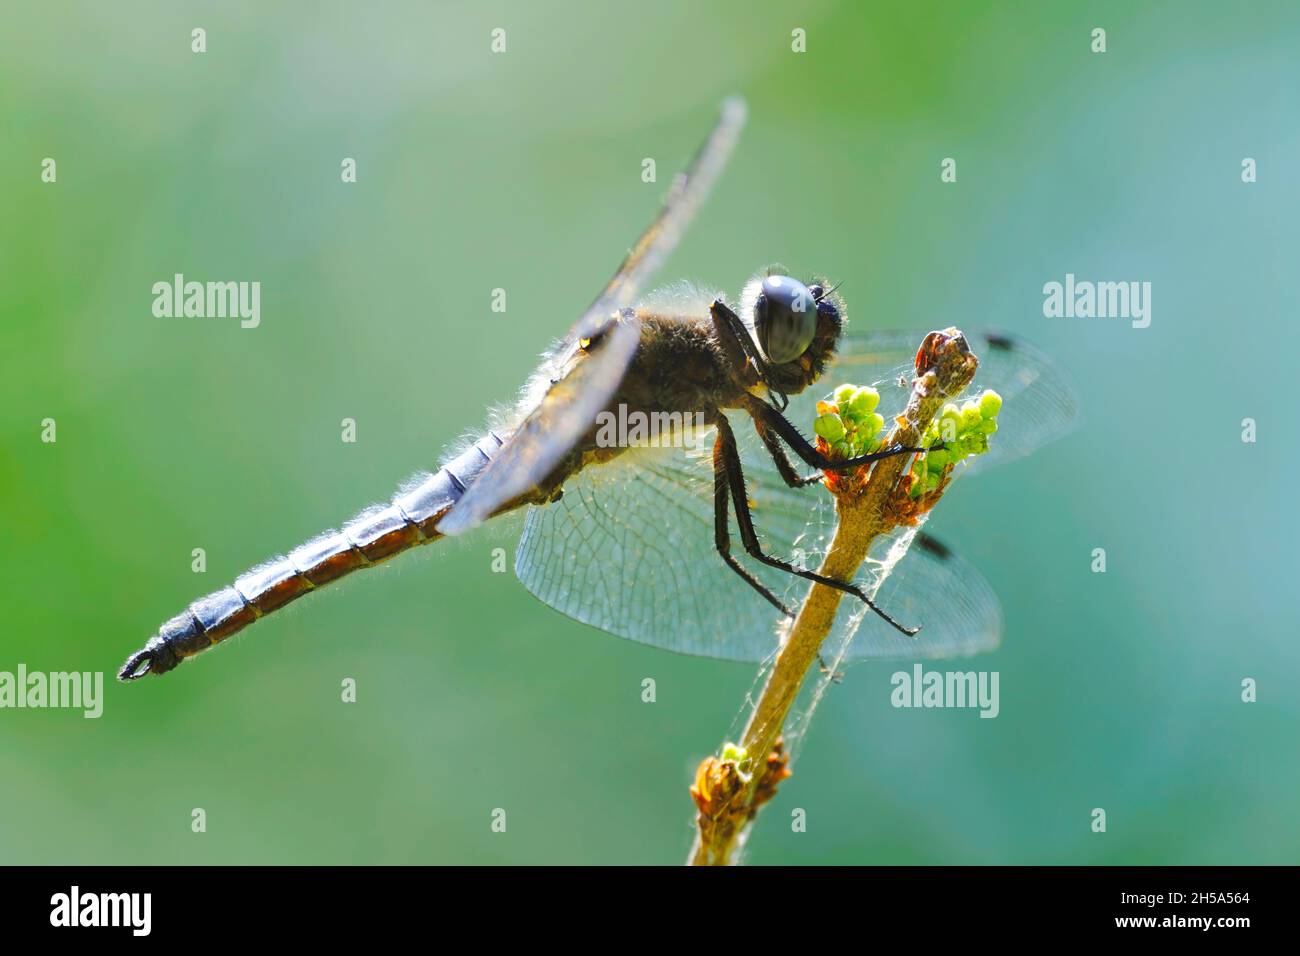 dragonfly sitting on a plant, green background Stock Photo